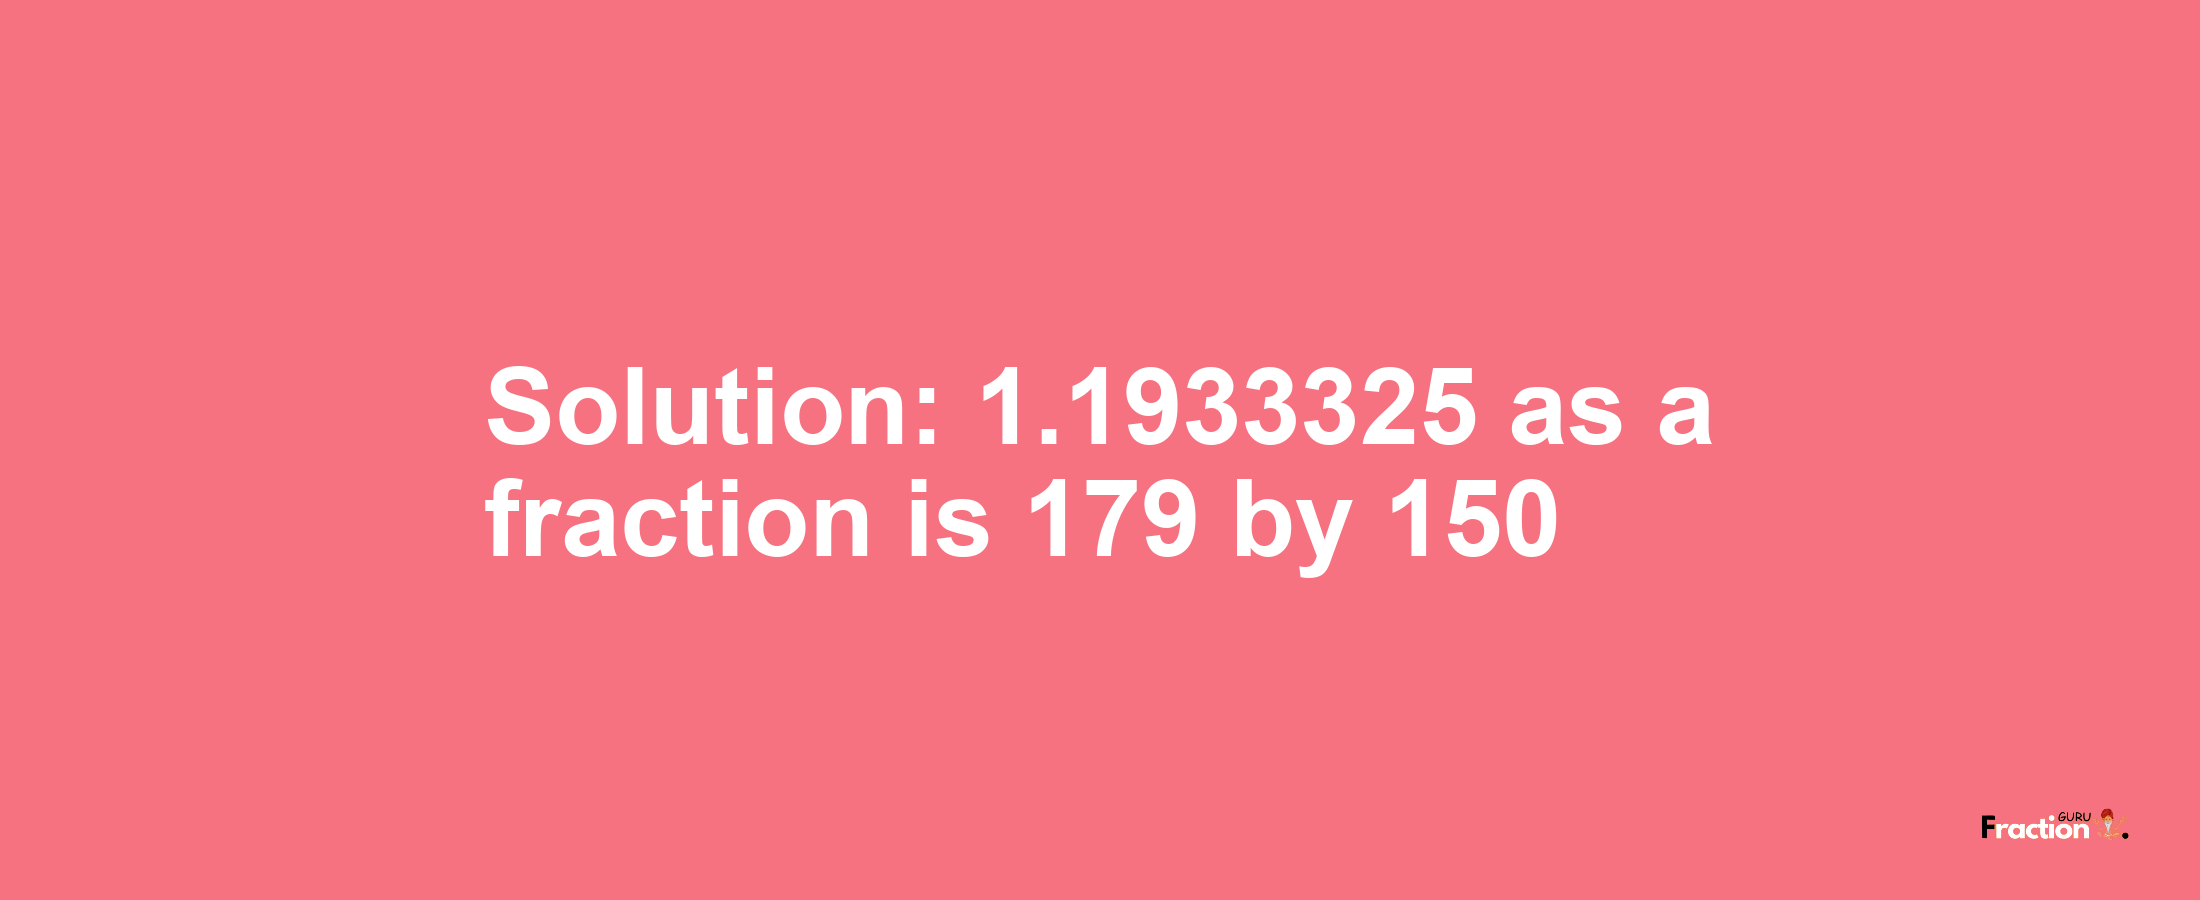 Solution:1.1933325 as a fraction is 179/150